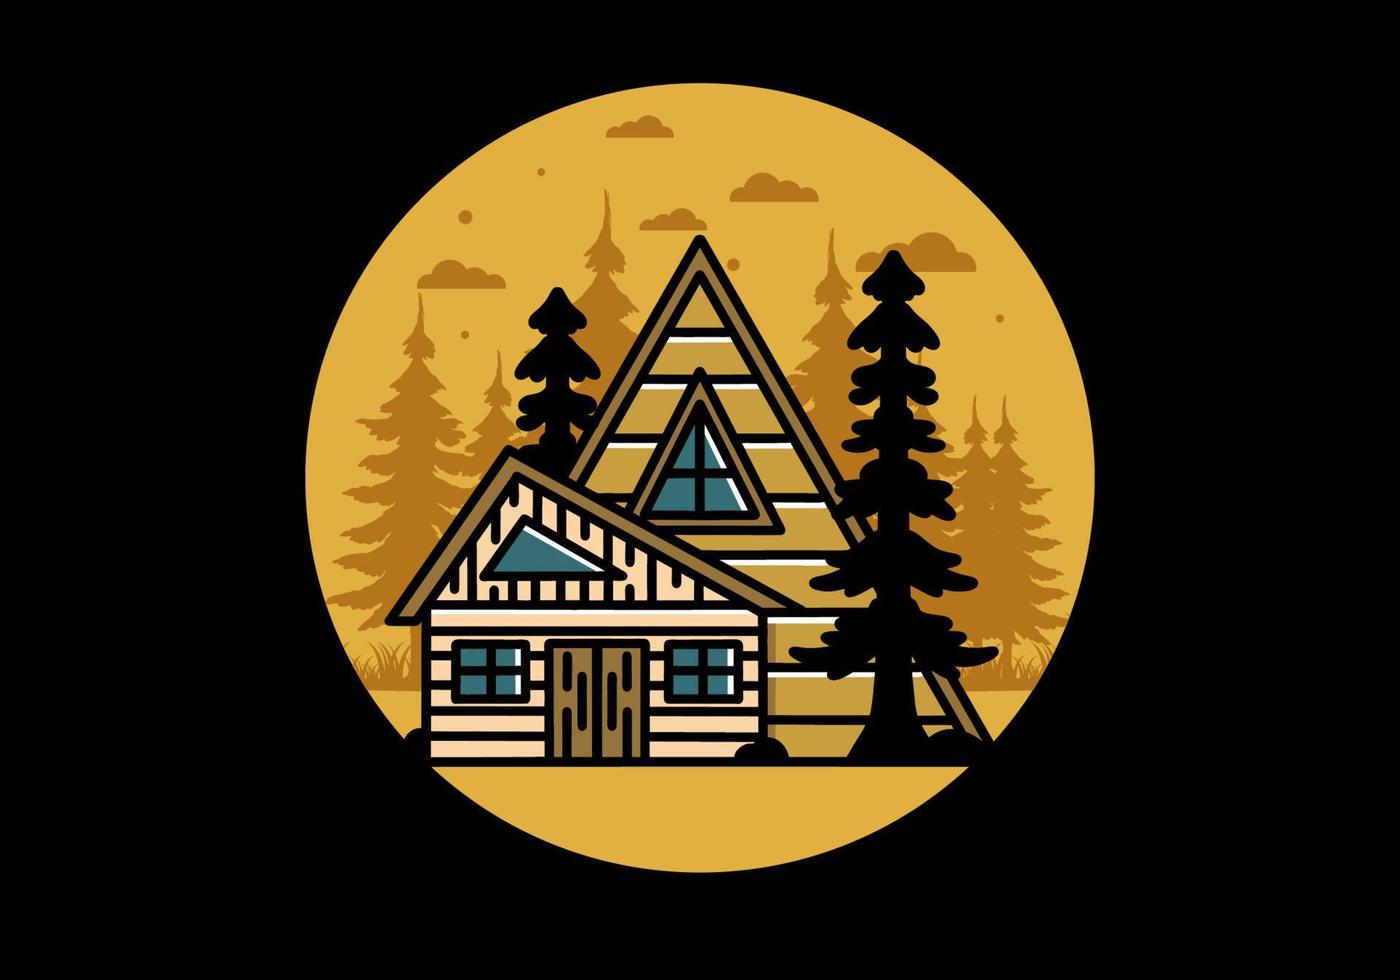 Aesthetic wood house between two pine tree illustration badge design vector